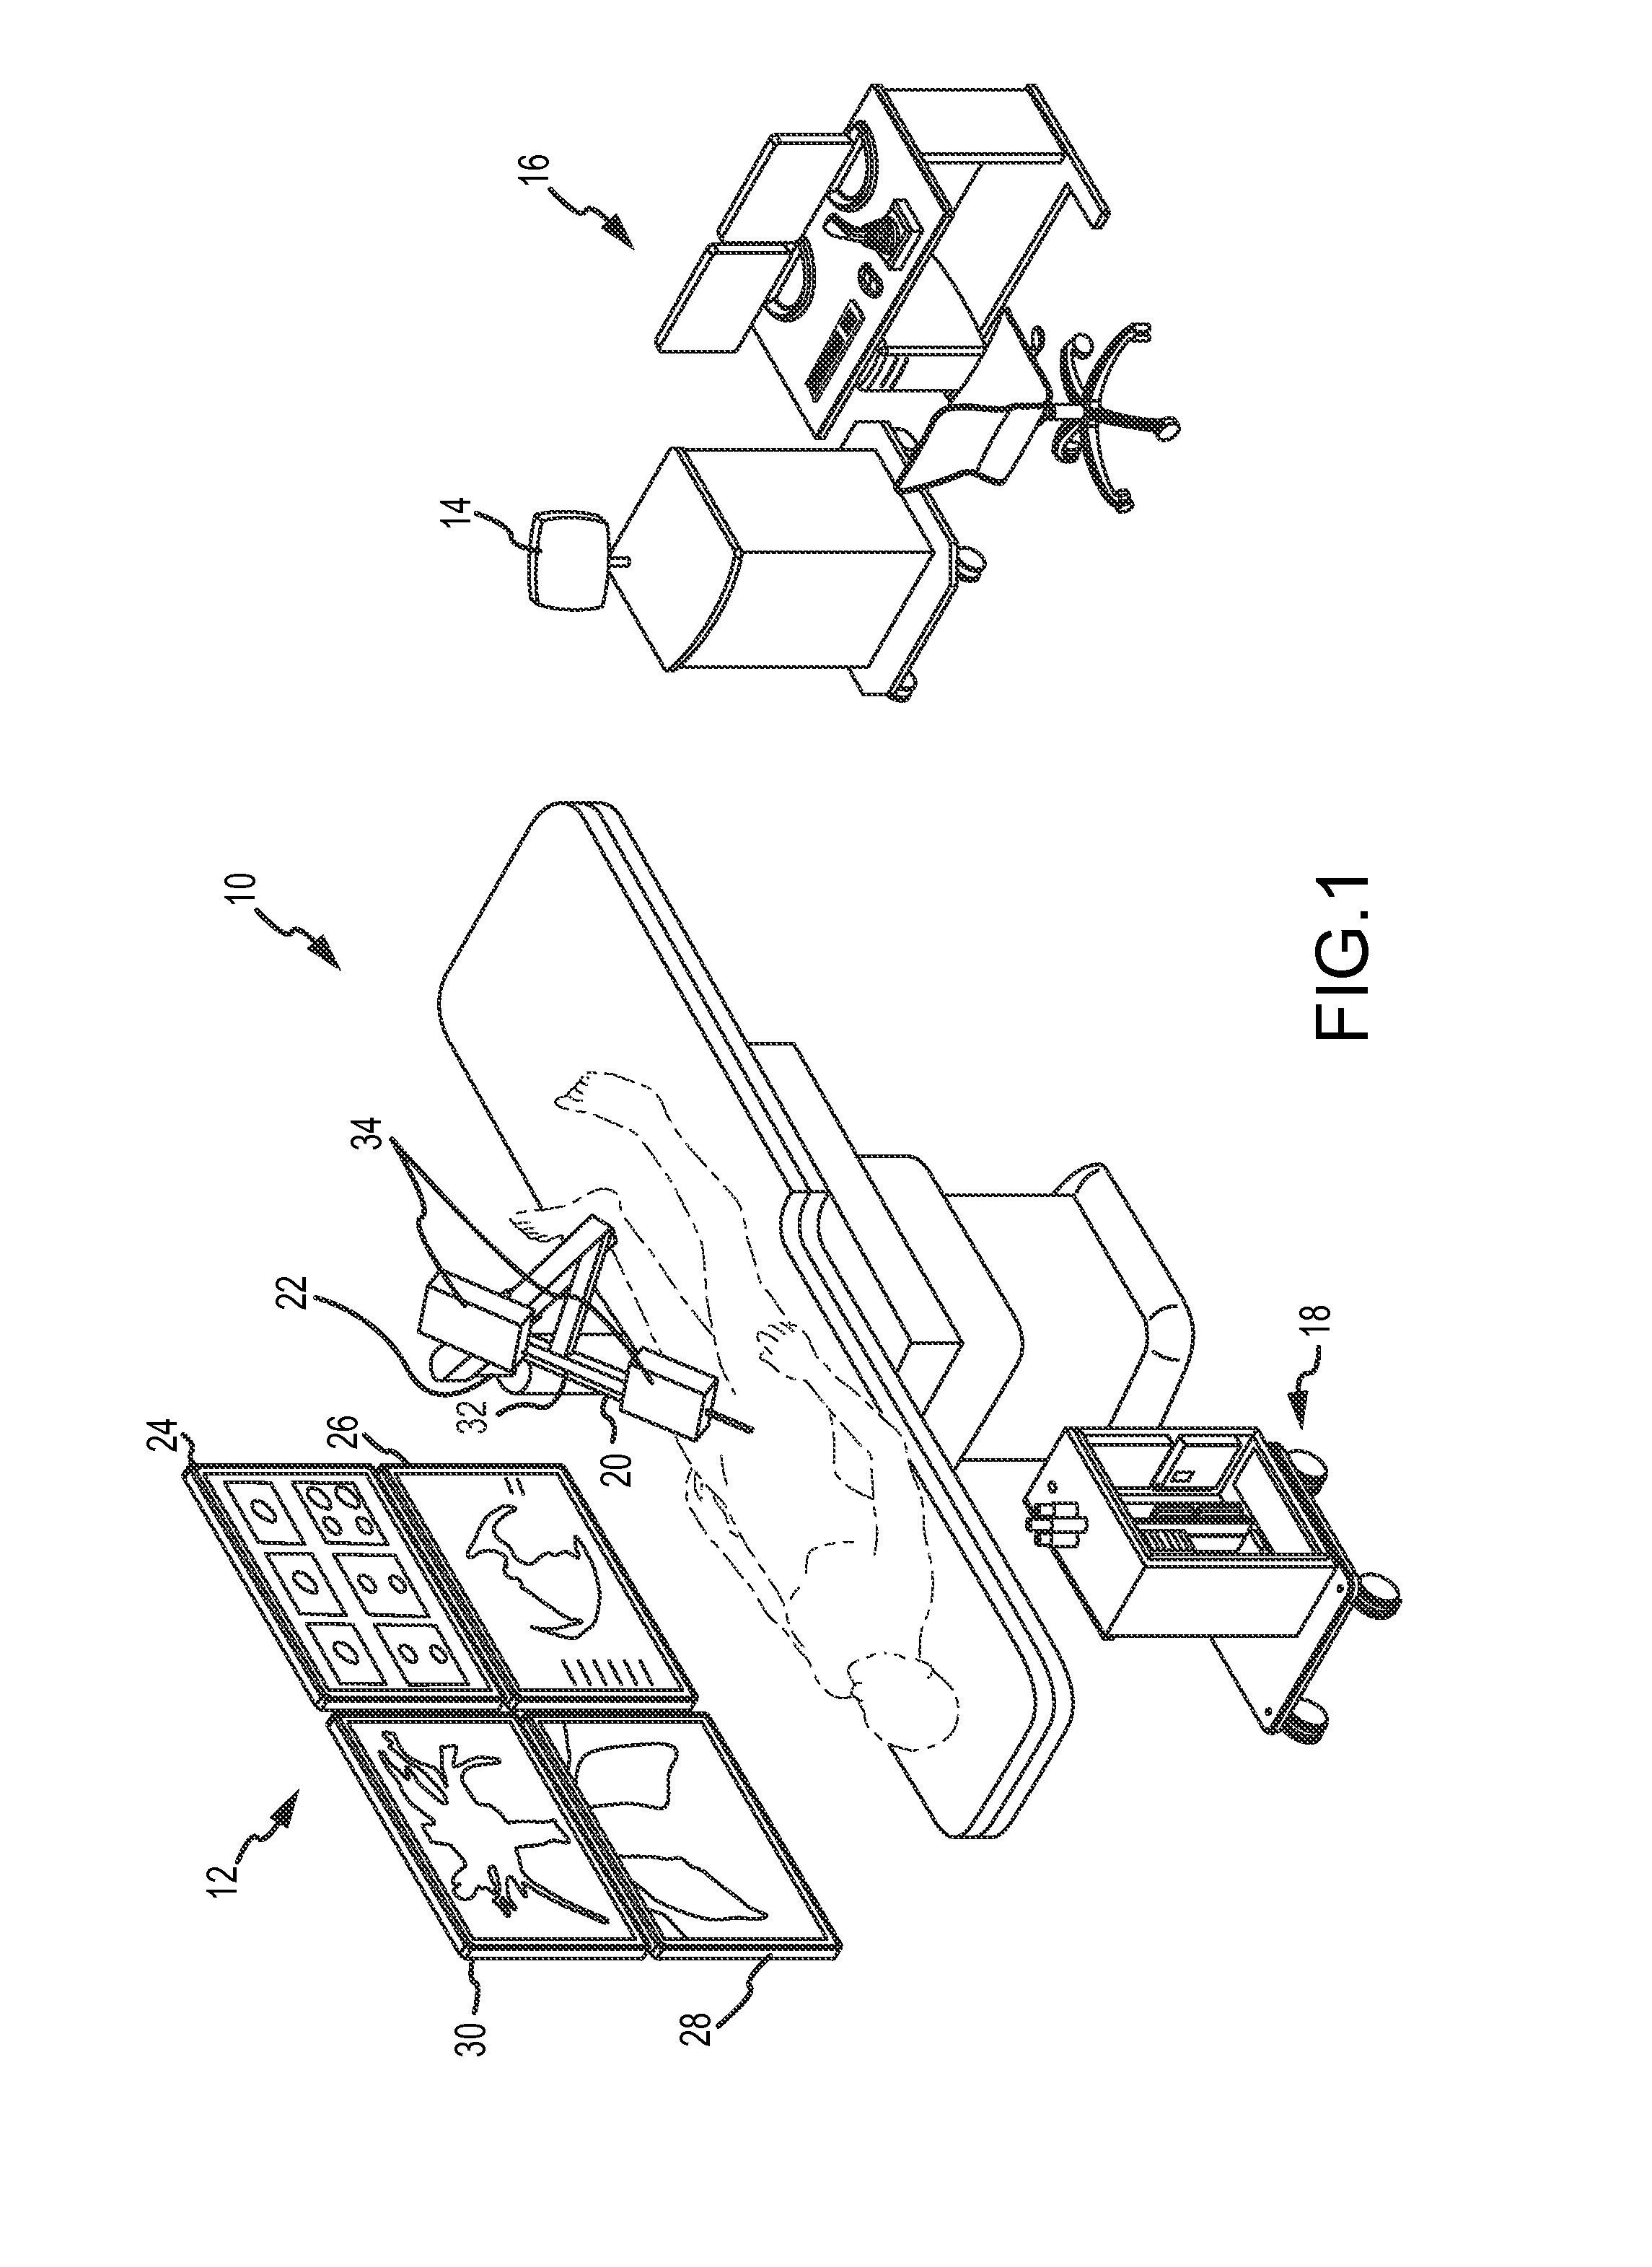 Drive assembly for use in a robotic control and guidance system